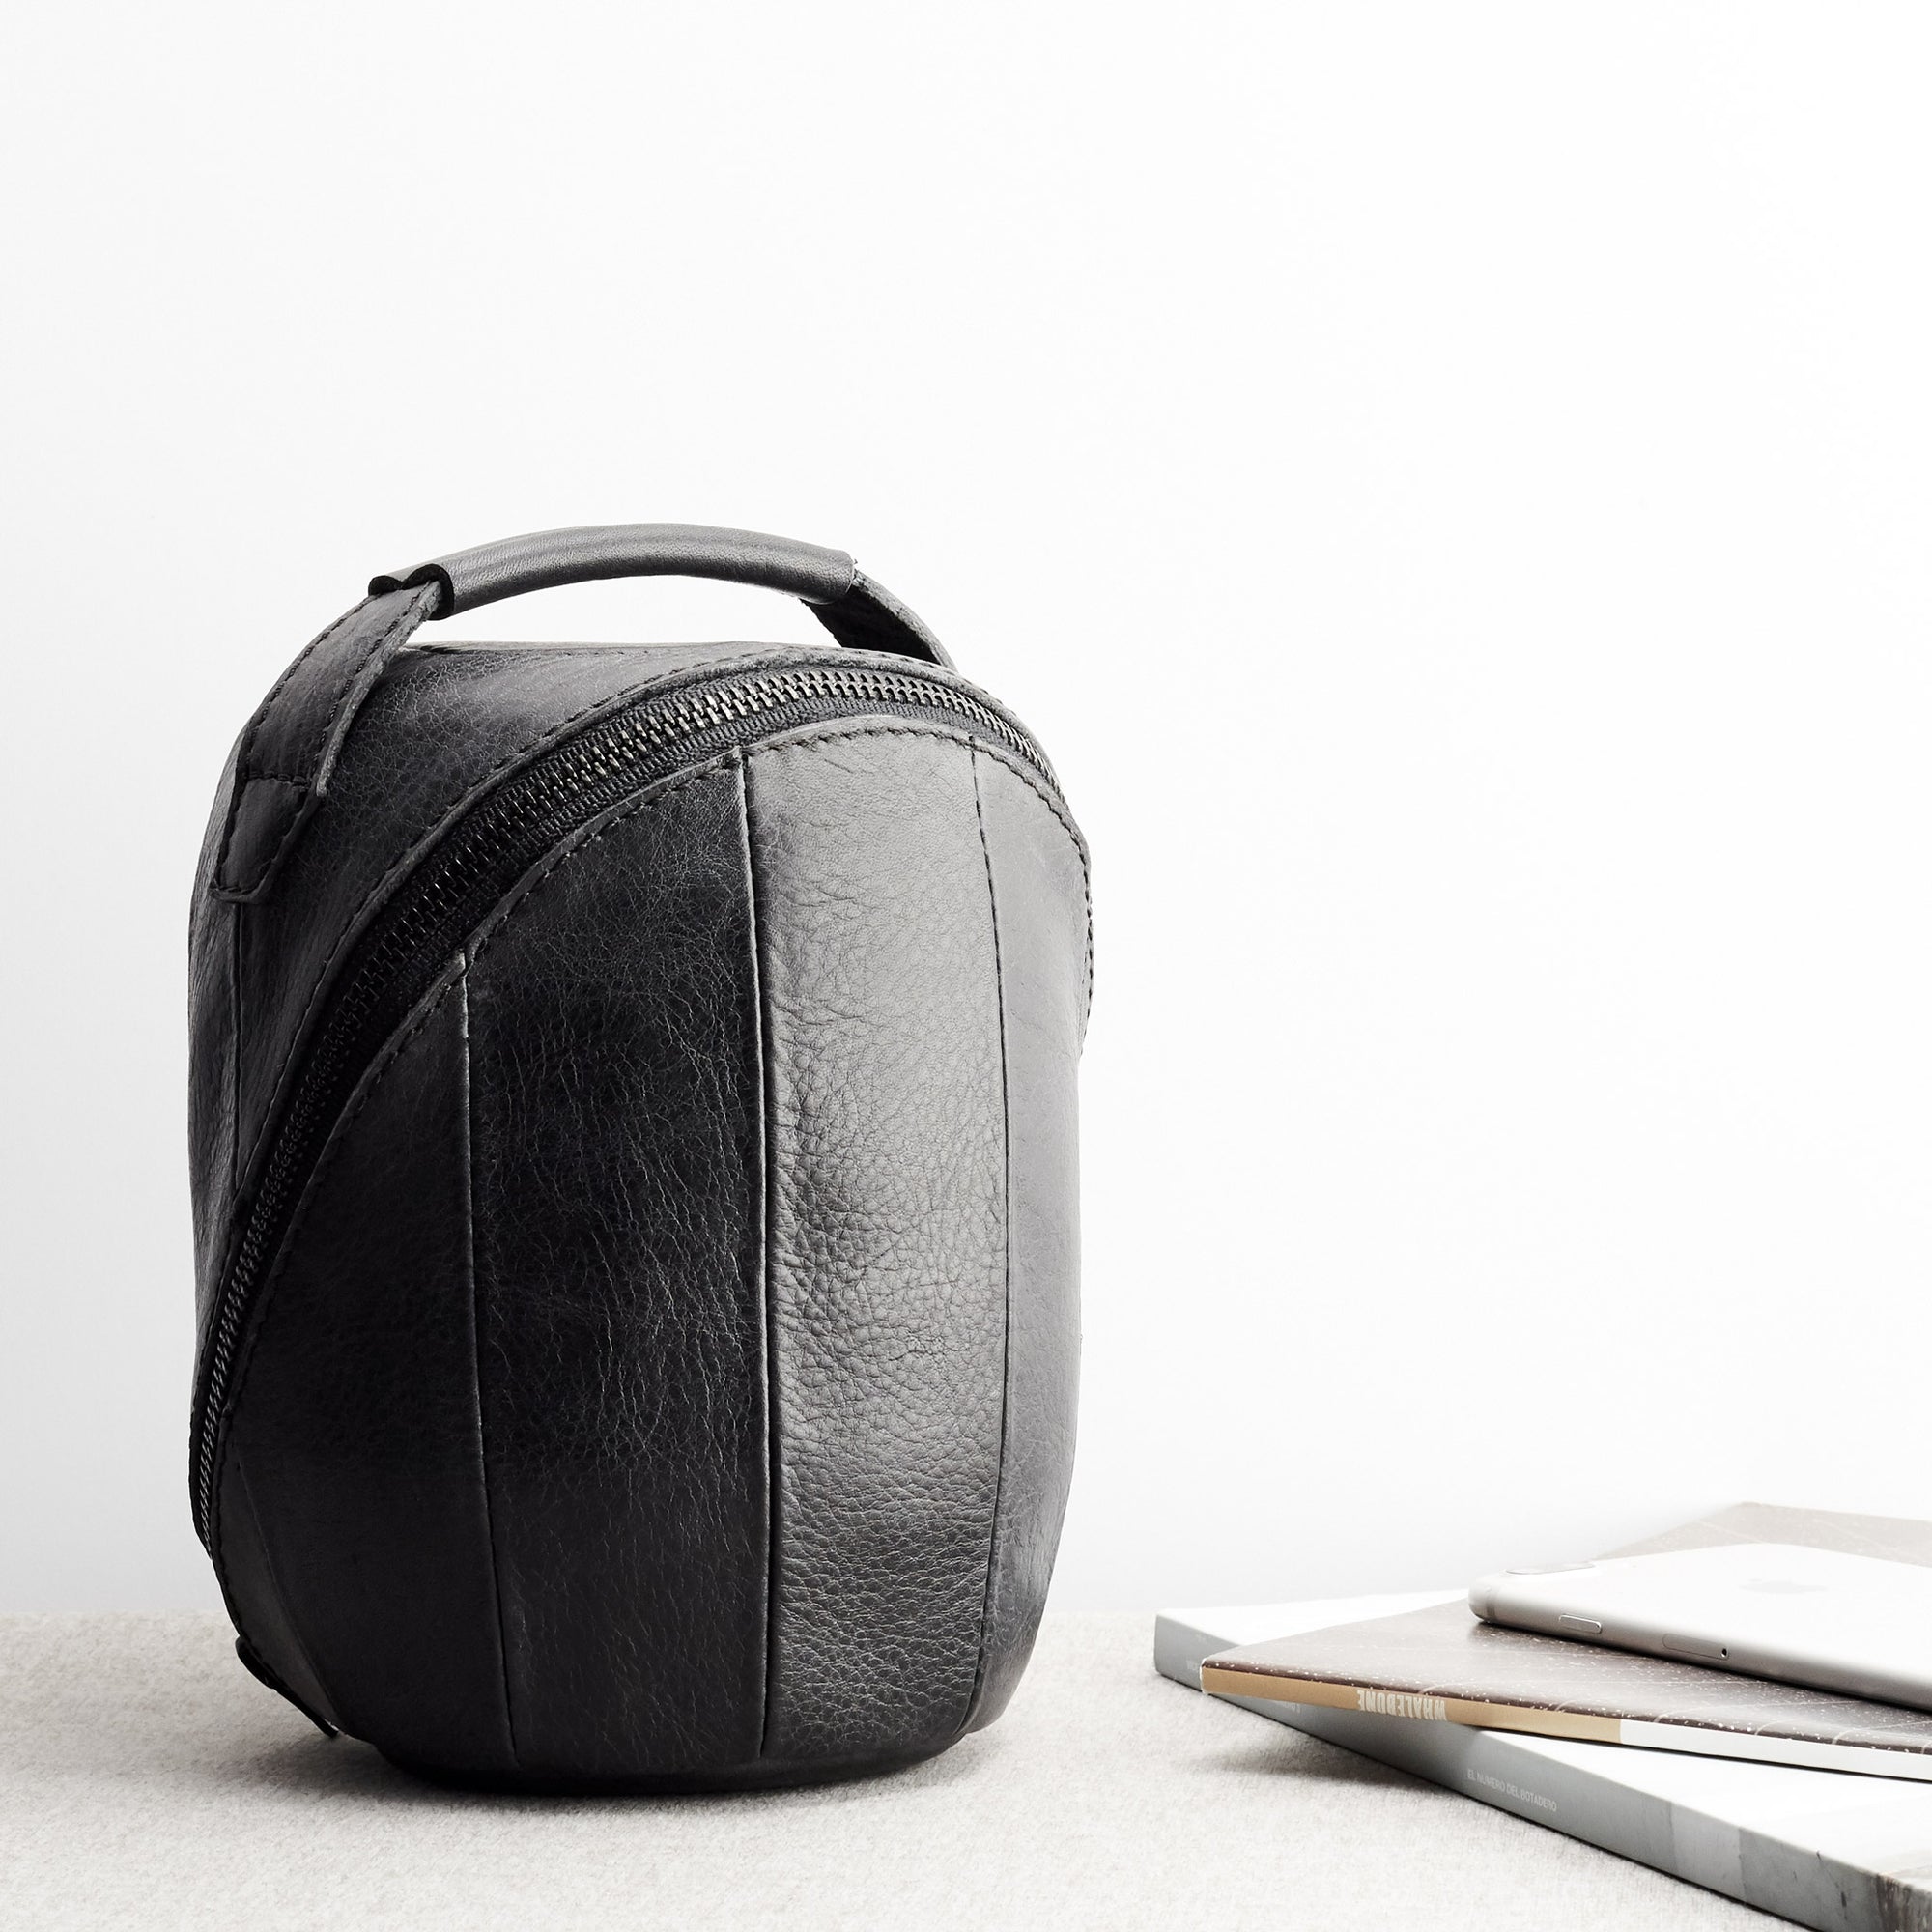 Unique handmade leather cover. HomePod black leather travel carrying case.